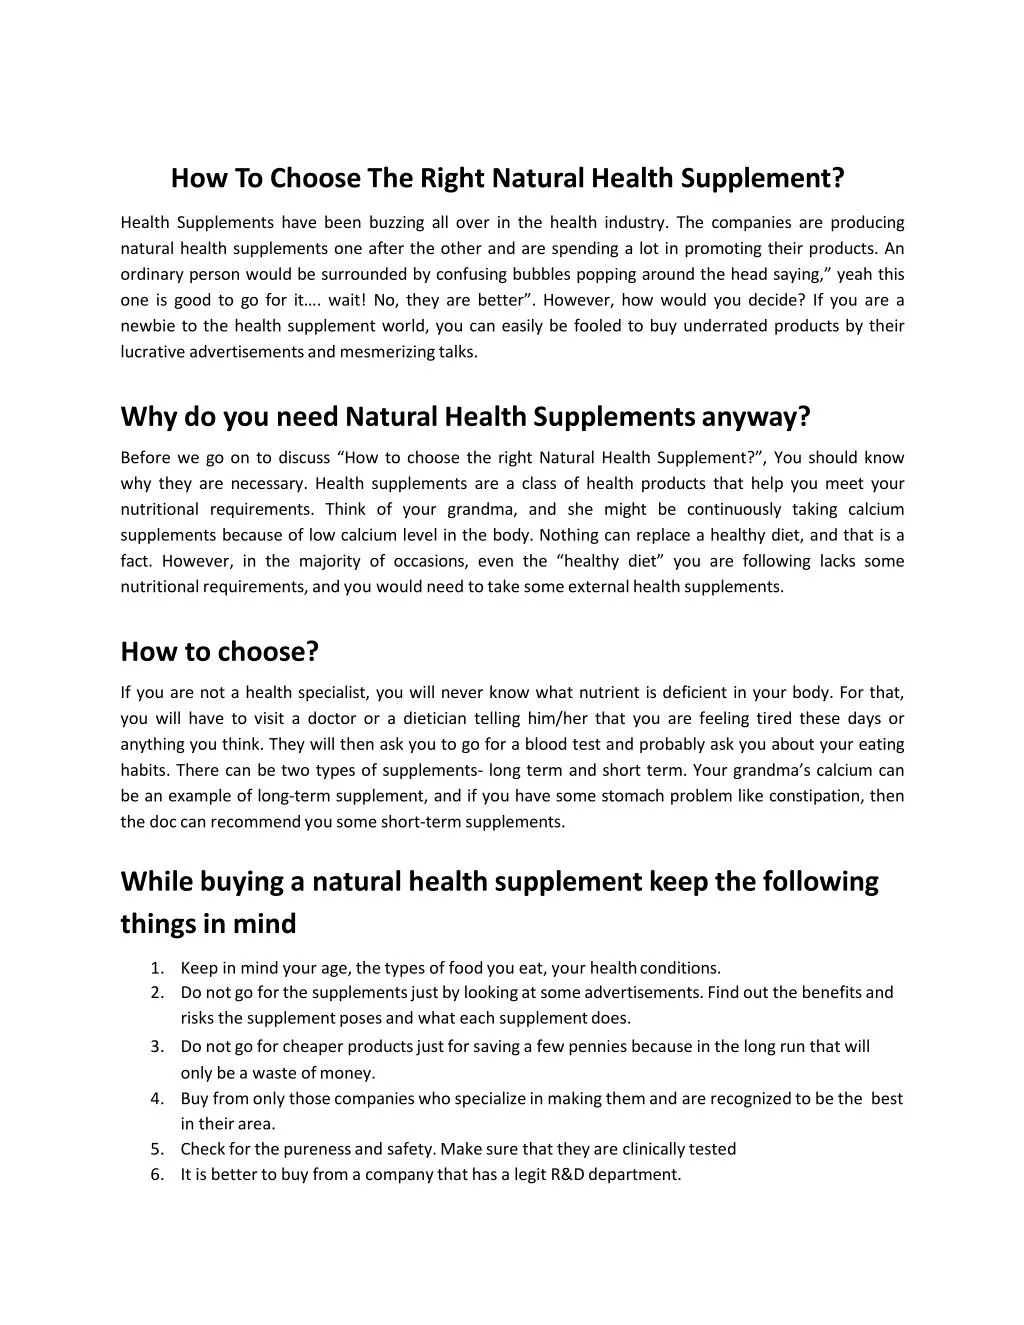 how to choose the right natural health supplement